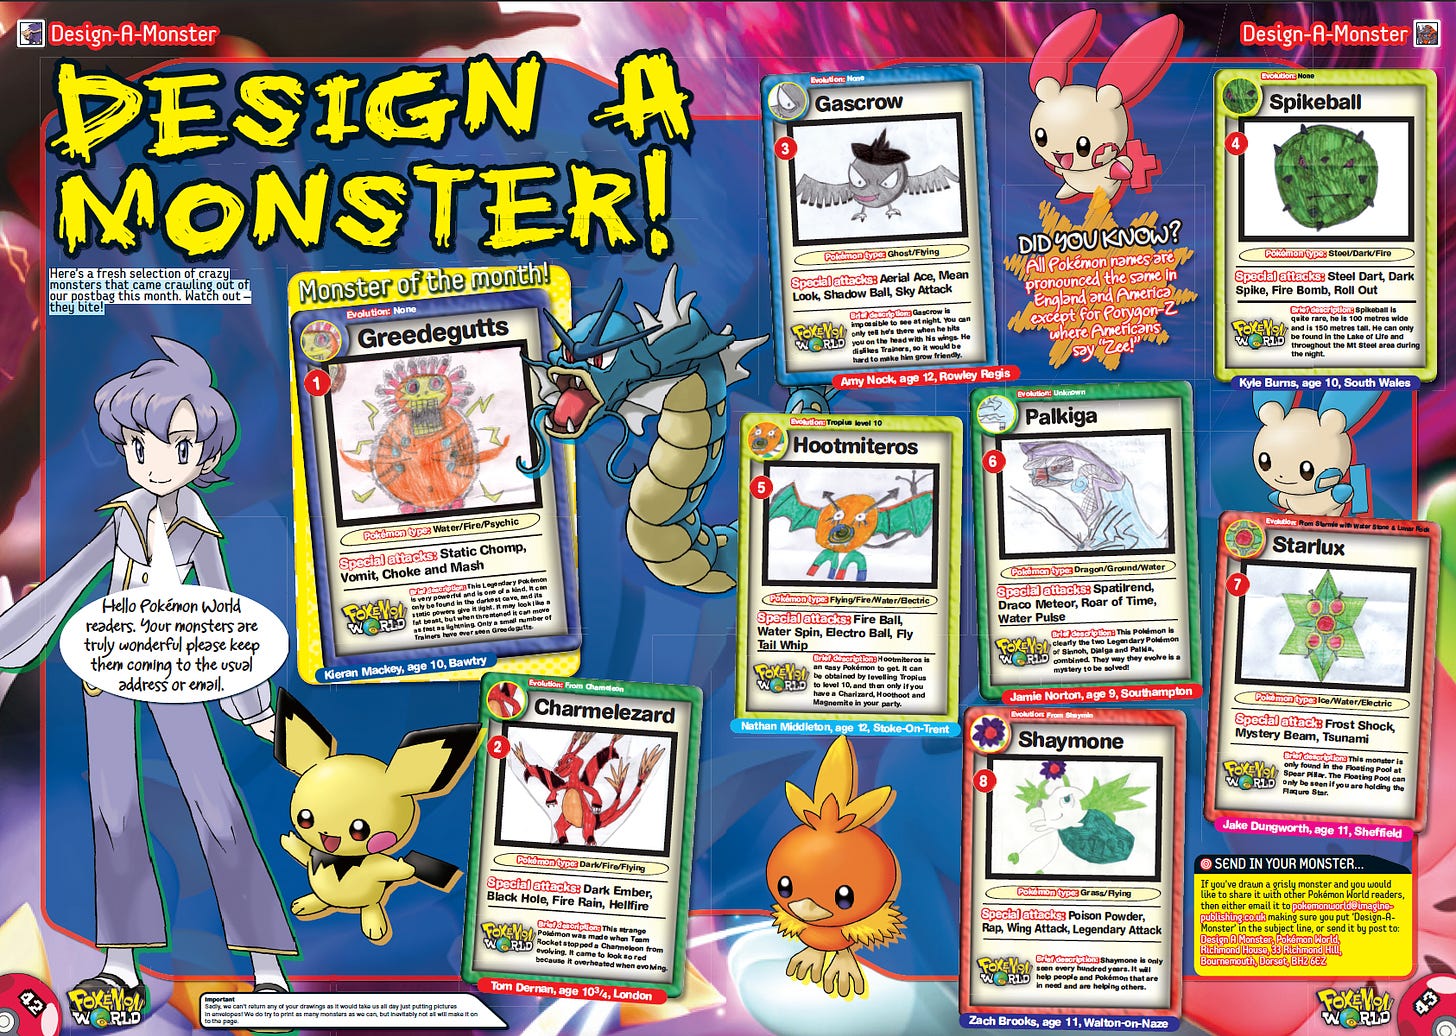 Design a Monster was another regular section of the magazine, where readers could submit their drawings of Pokémon they came up with